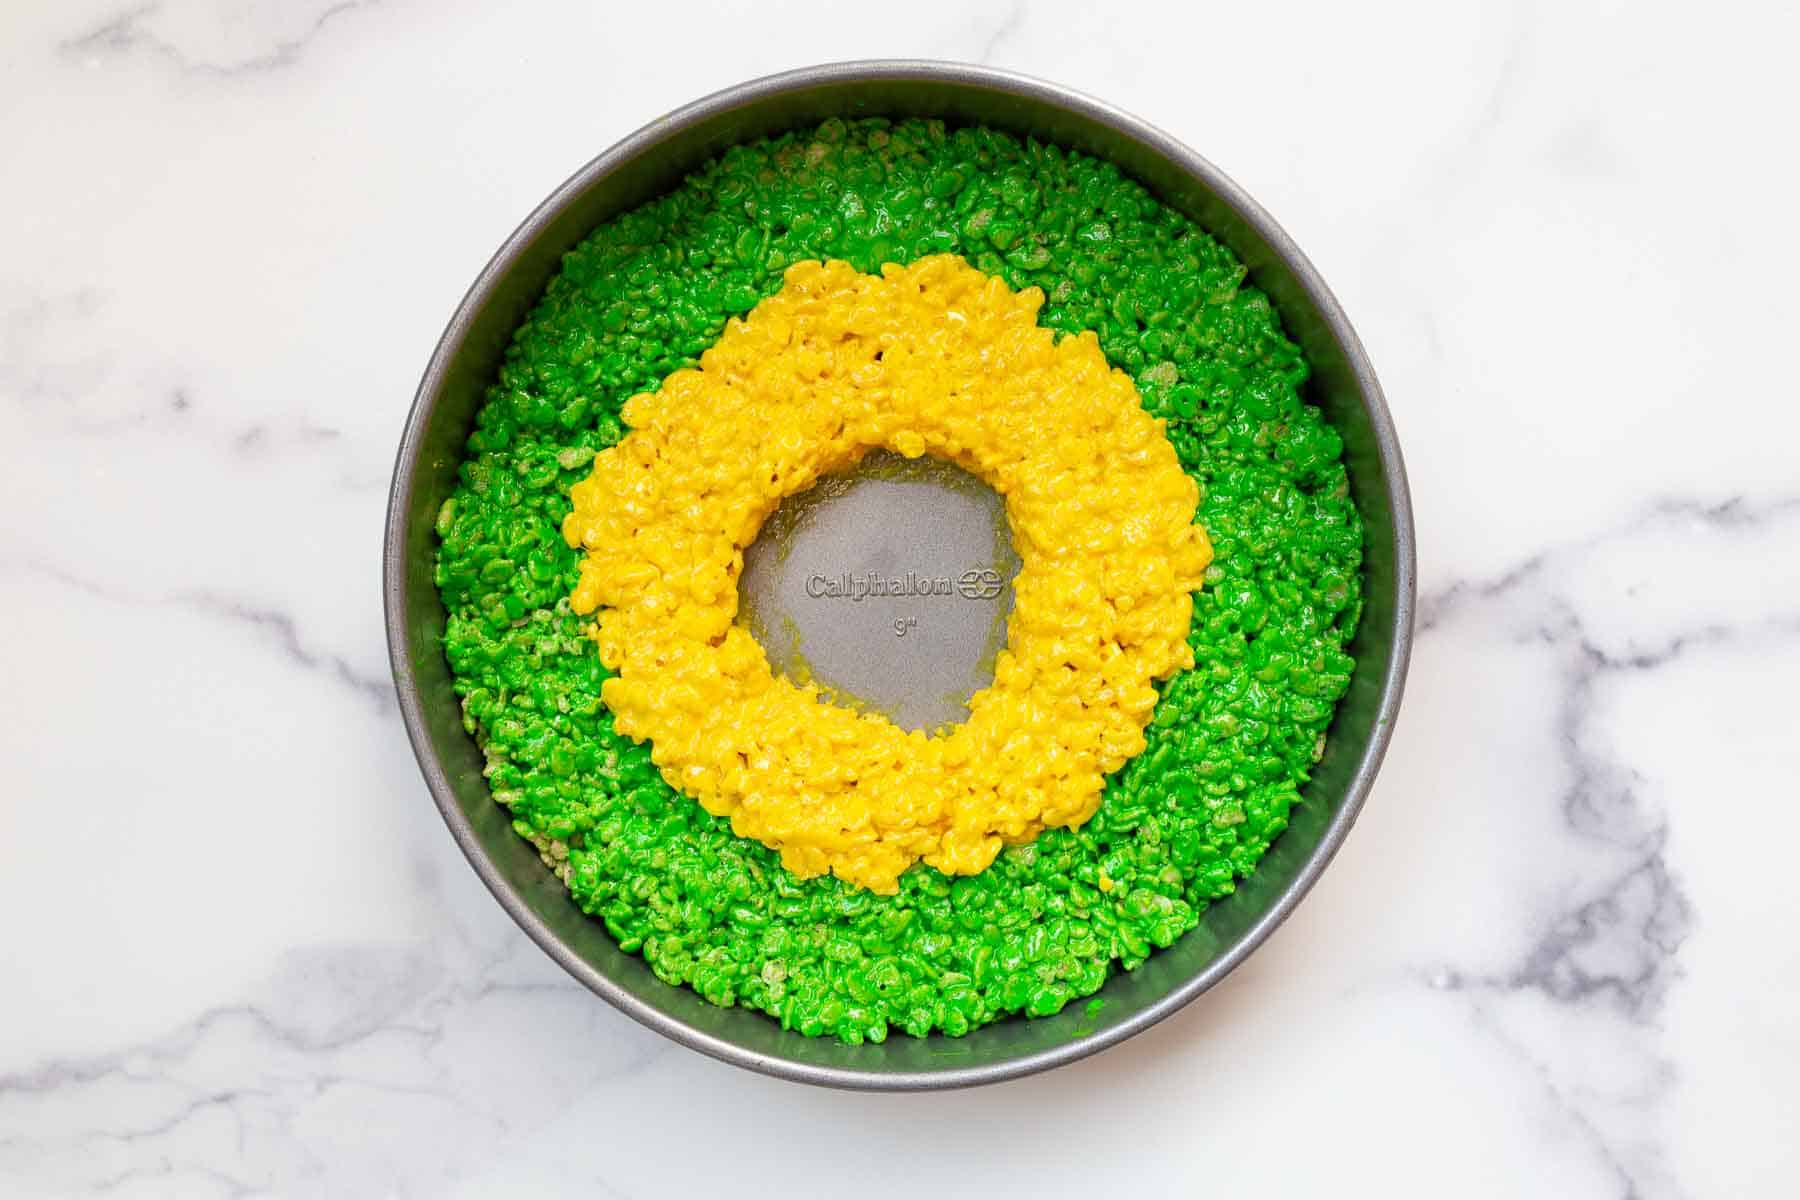 Ring of green and yellow dessert in a round cake pan on marble surface.